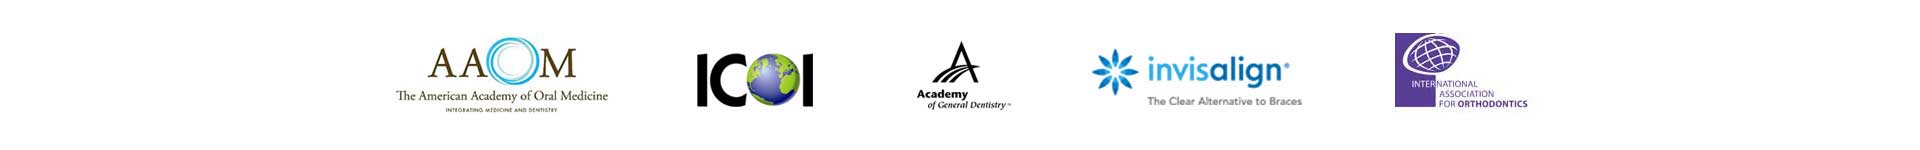 The Gentle Dentist Collegeville Trappe PA - dental care,dental services,Trappe